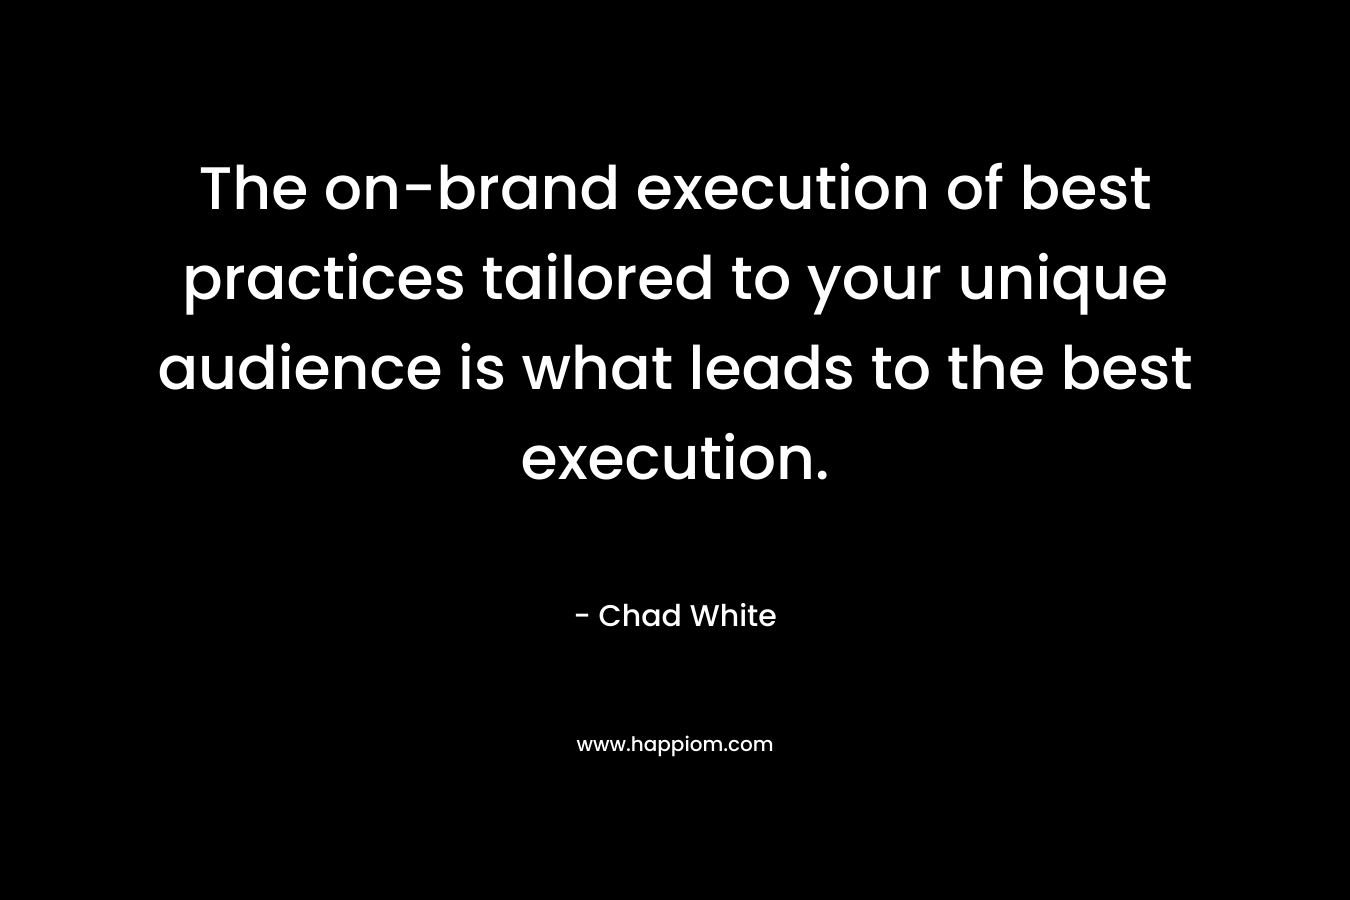 The on-brand execution of best practices tailored to your unique audience is what leads to the best execution.